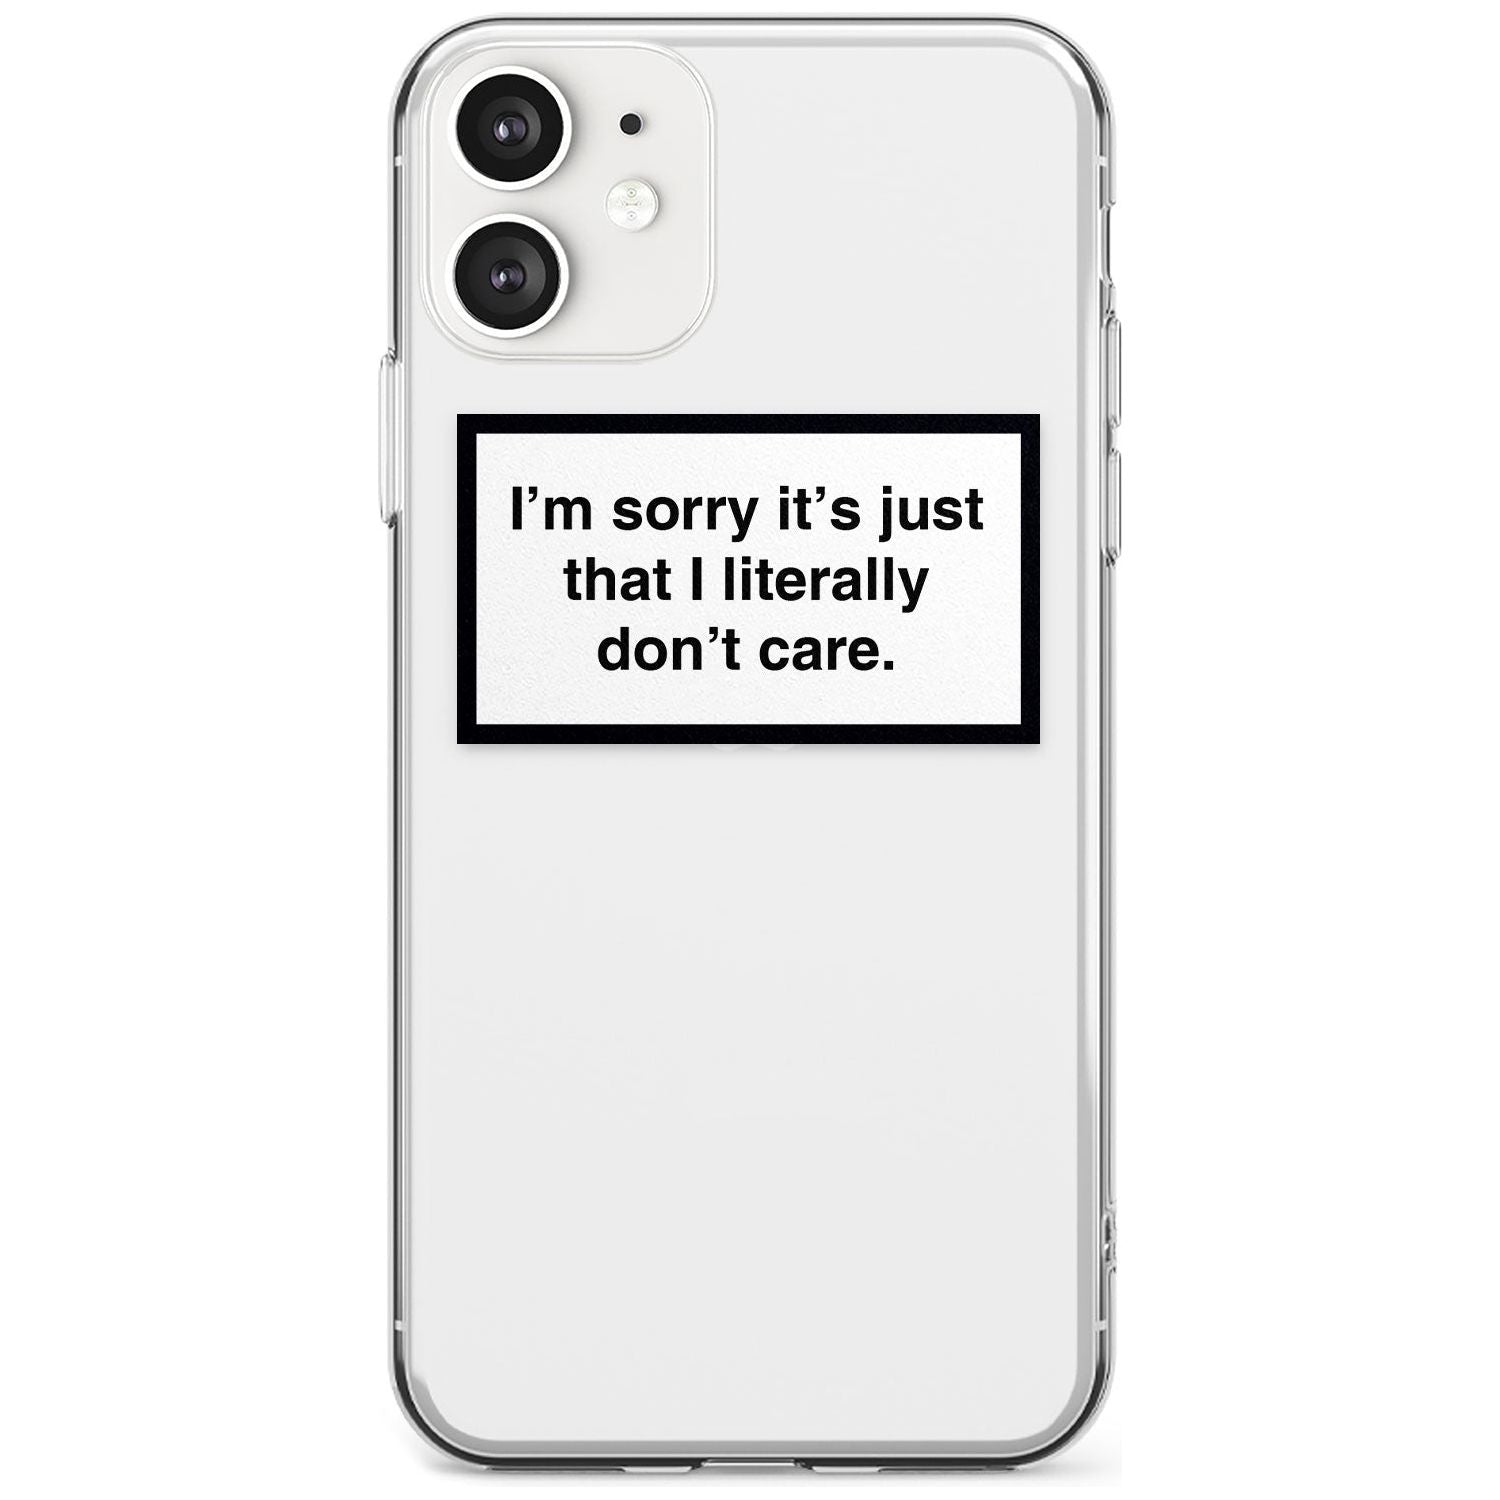 I'm sorry it's just that I literally don't care Black Impact Phone Case for iPhone 11